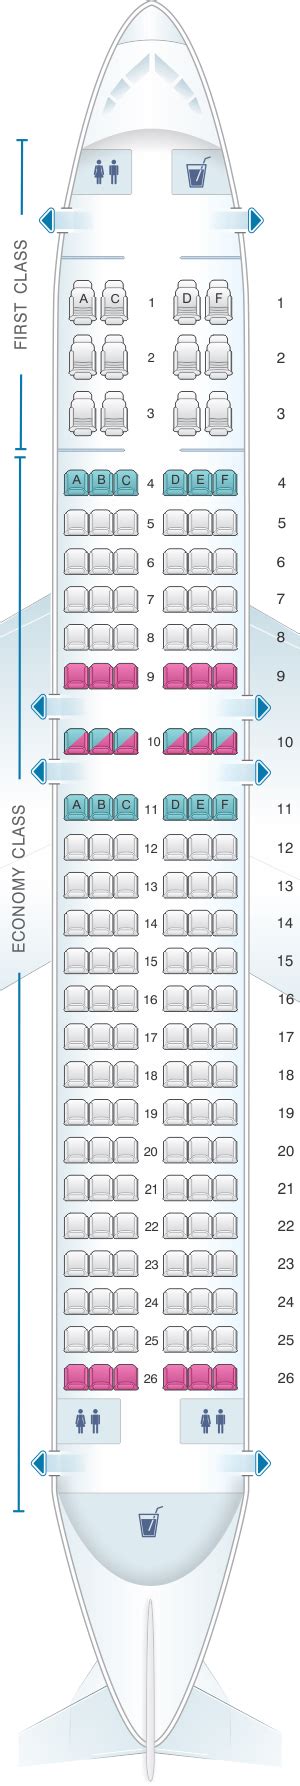 Read user reviews for Delta Airbus A319 (319) Submitted by SeatGuru User on 2019/09/27 for Seat 19A. This was Delta 545 from BOS to LGA, on N345NB. Seat 19A had perfect head side window alignment. This row has 2 windows, and is located on the back of the wing. Leg room is good for economy.. 